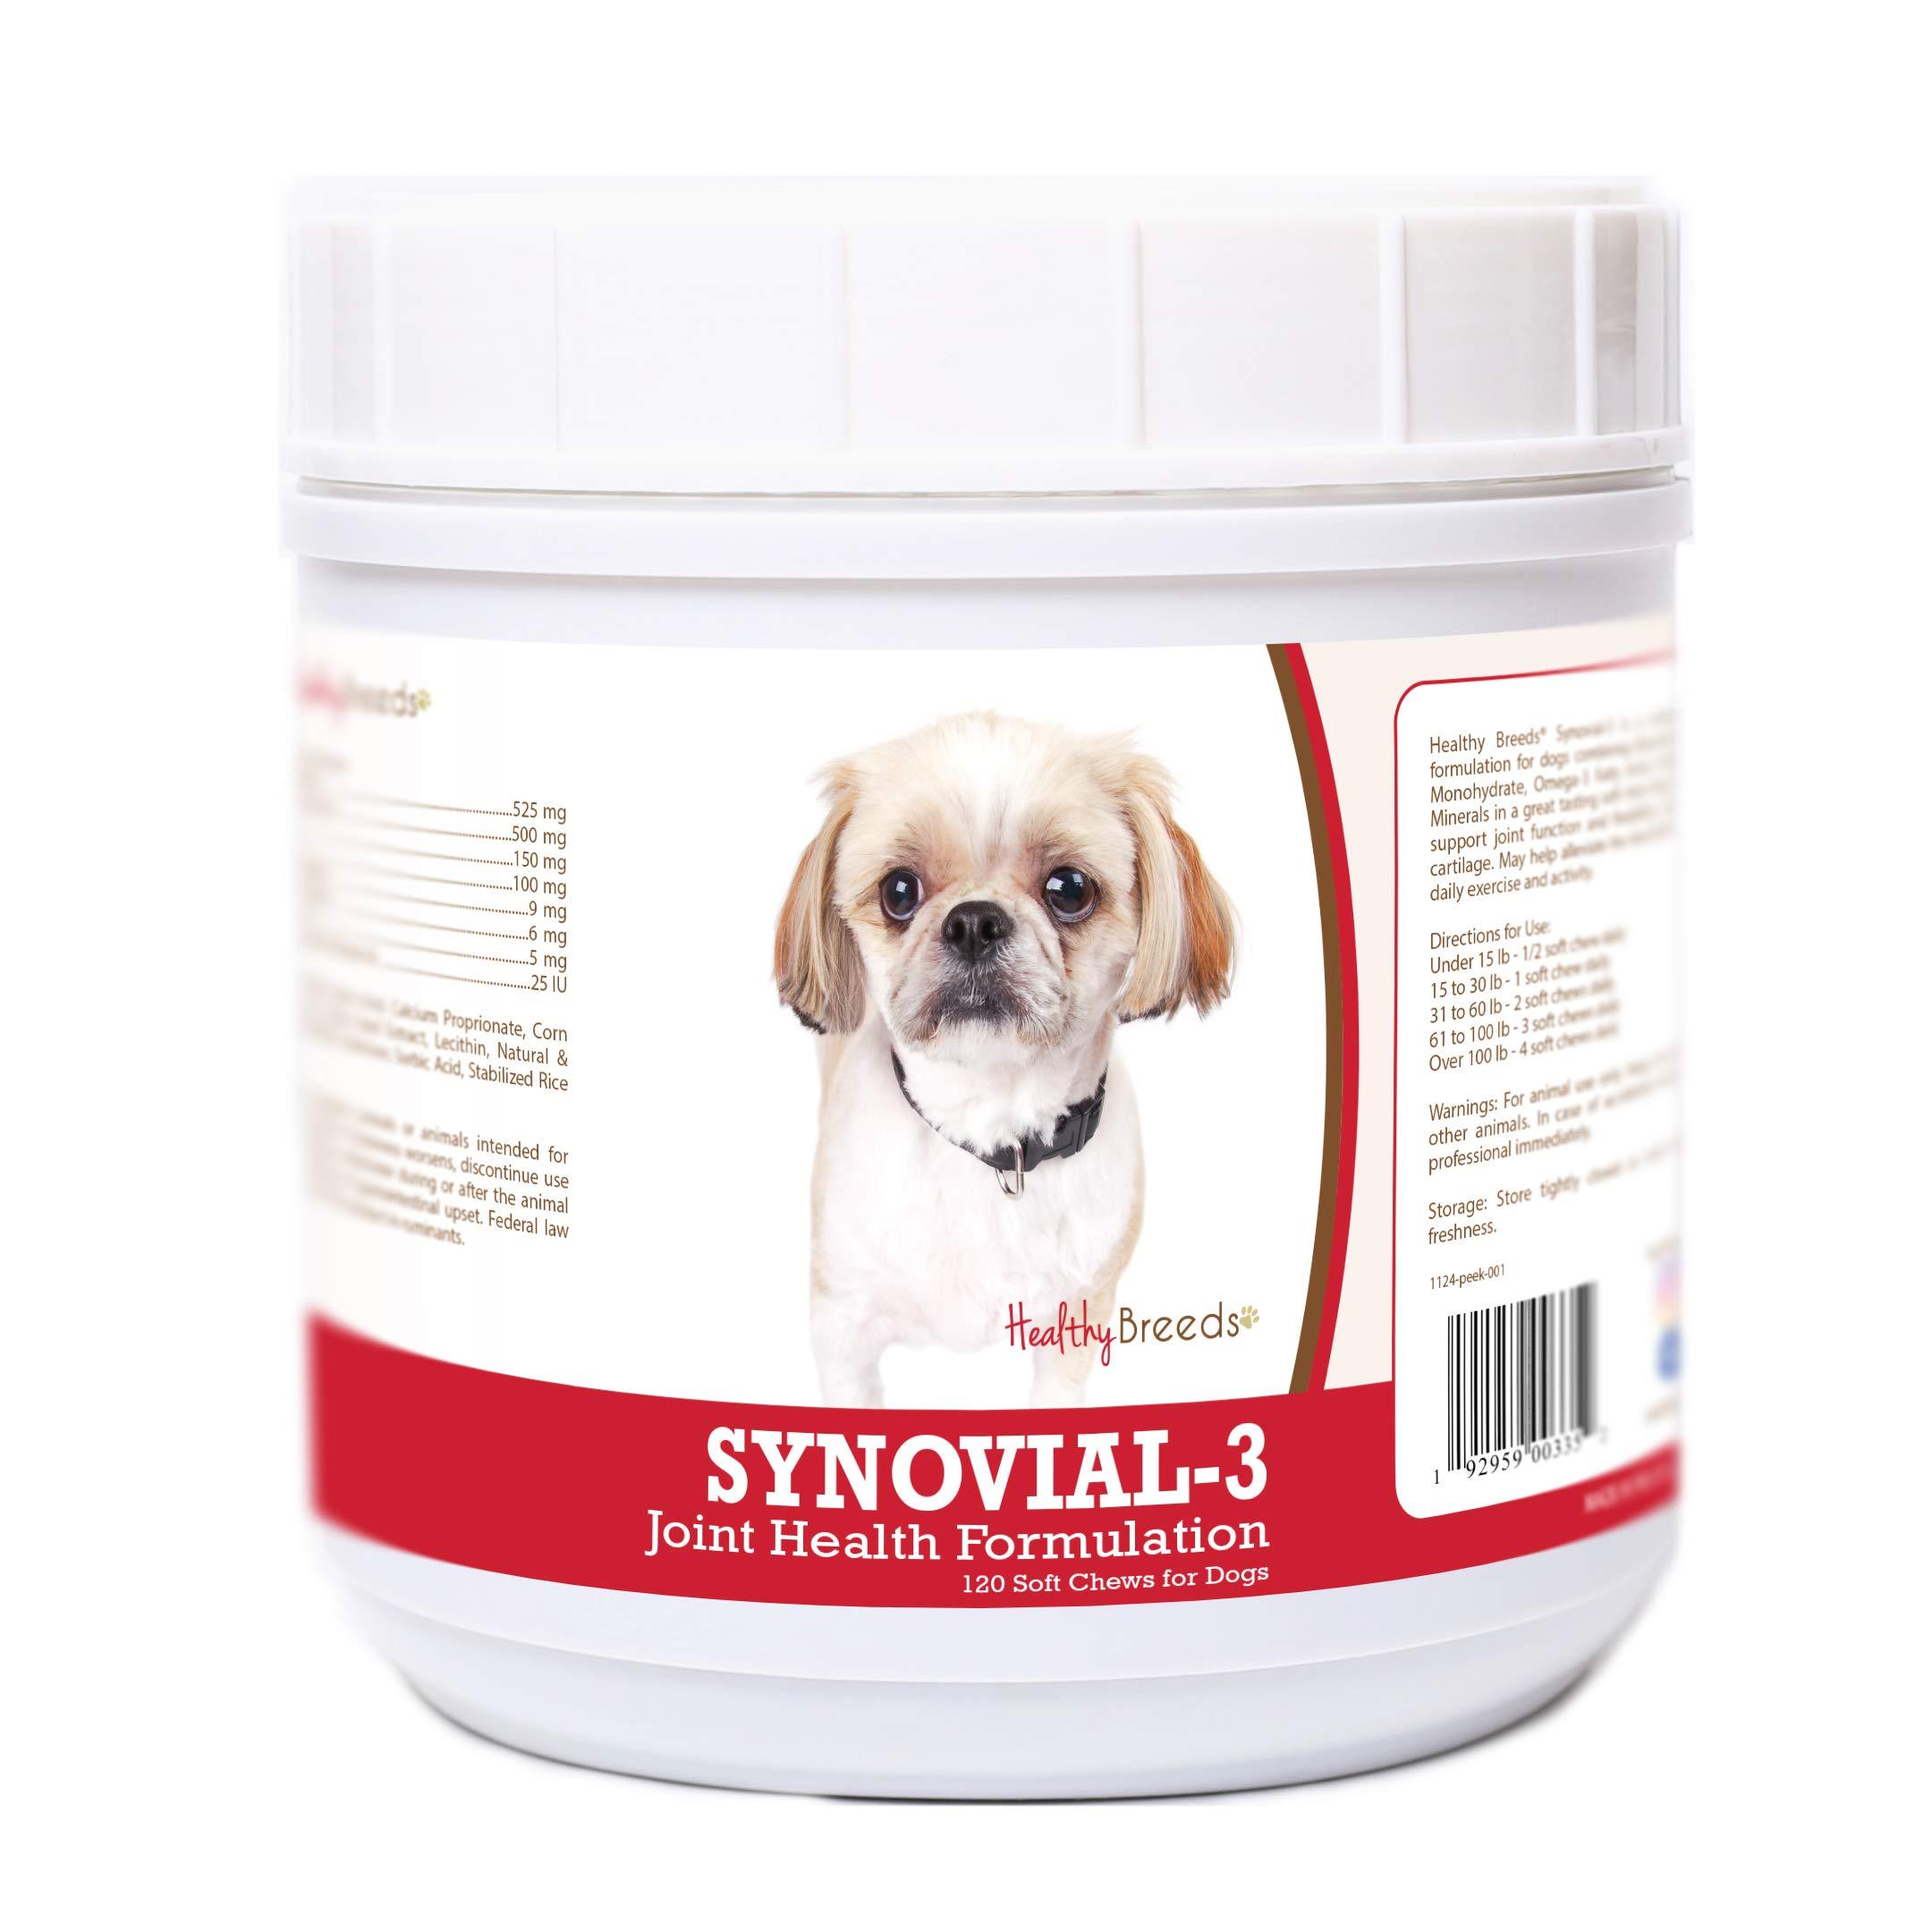 Healthy Breeds Peekapoo Synovial-3 Joint Health Formulation 120 Count